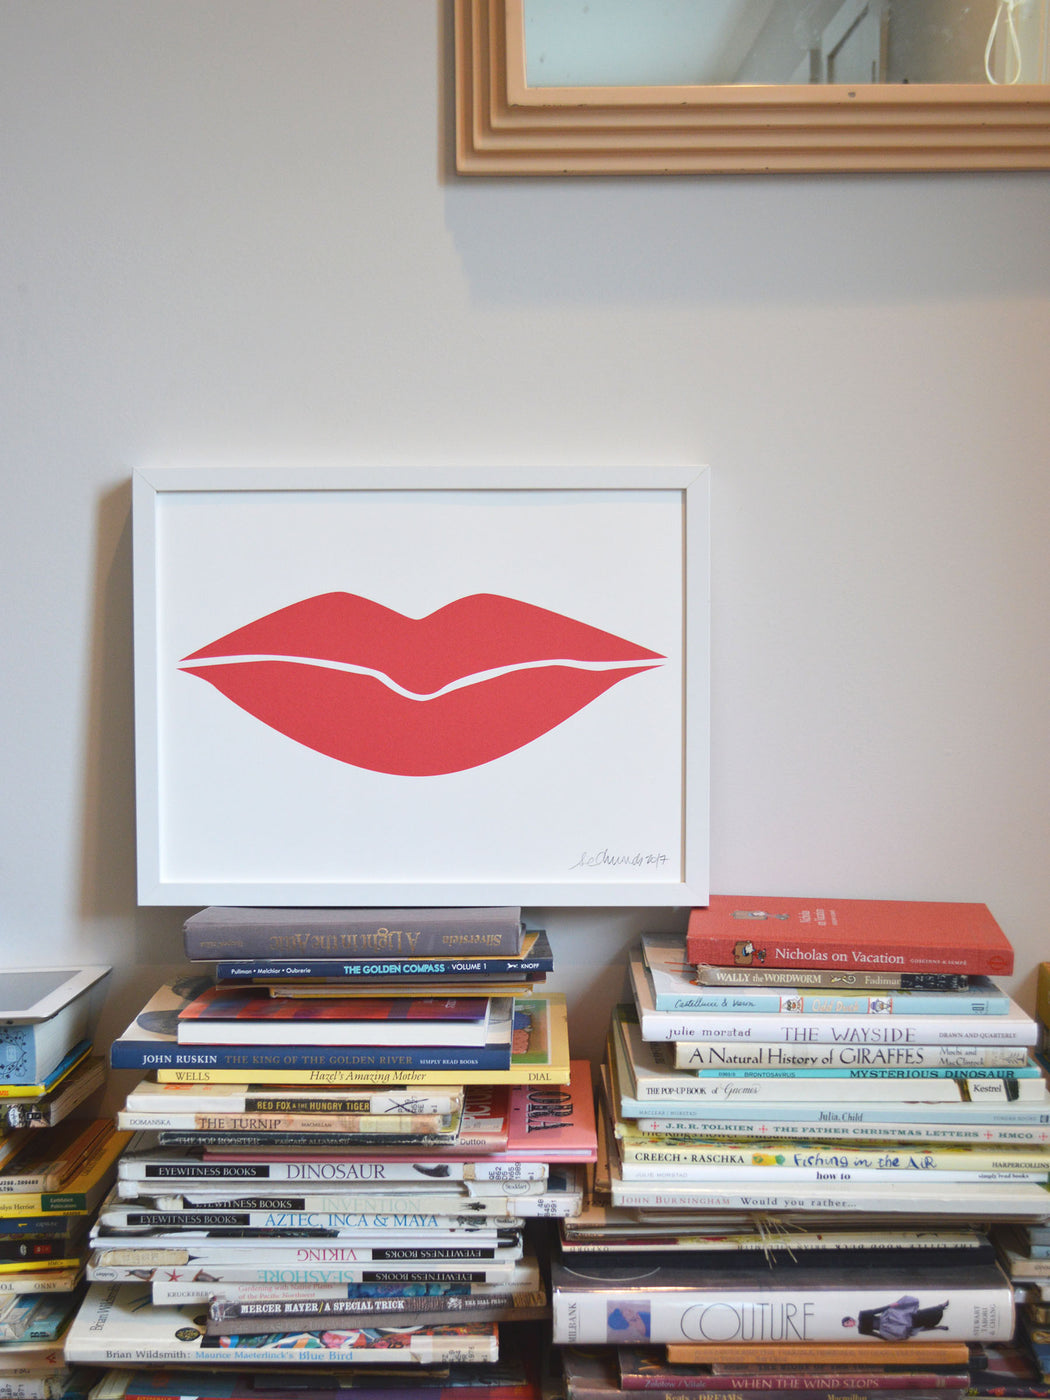 Banquet Workshop's lip print sitting on a stack of books in a home